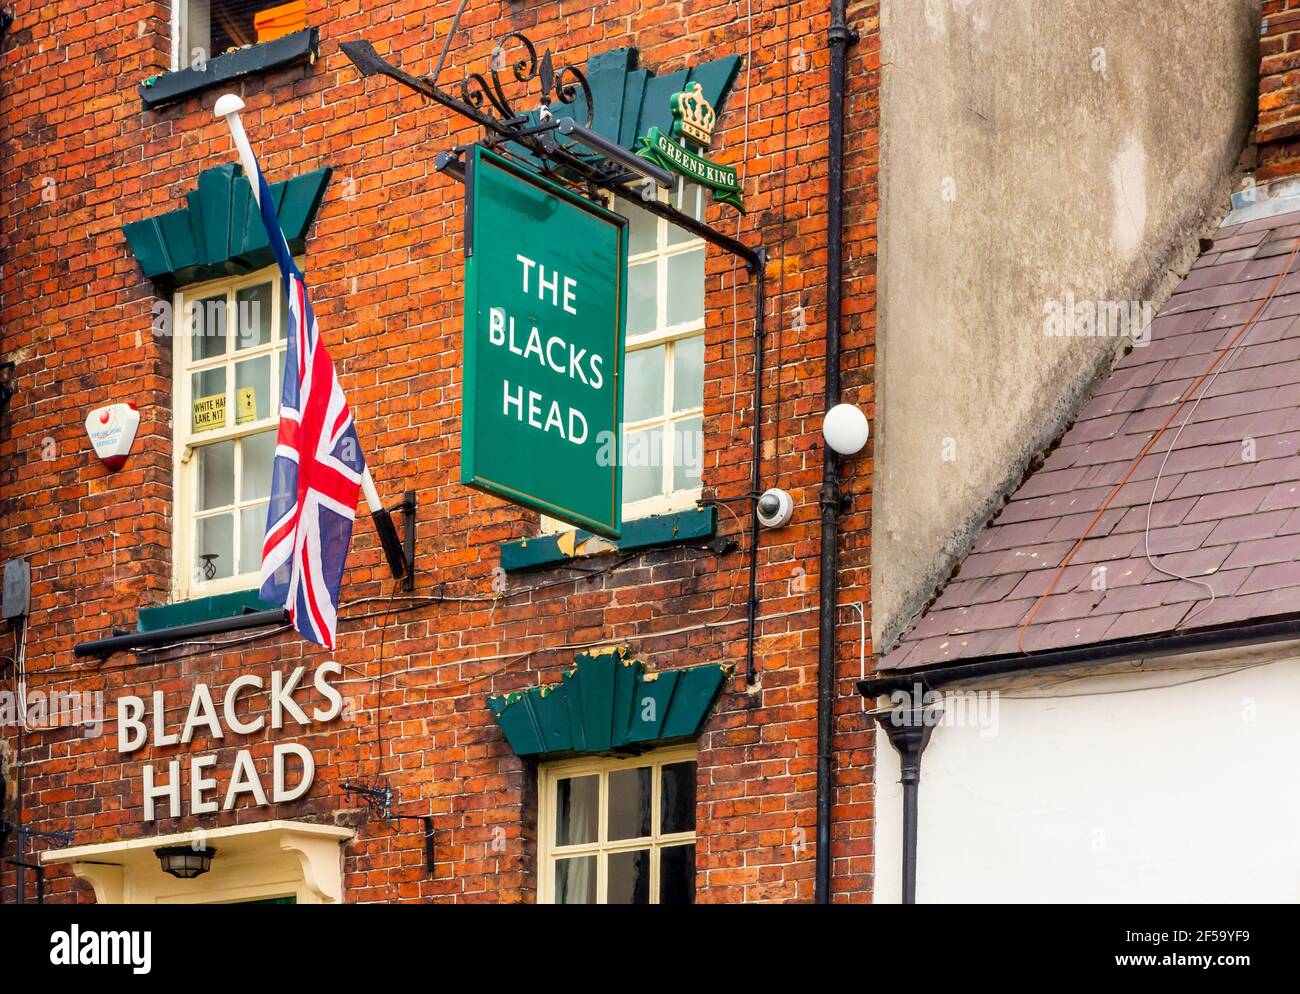 Exterior of the Blacks Head pub in Wirksworth Derbyshire England UK prior to its renaming due to the racist connotations of its original name. Stock Photo